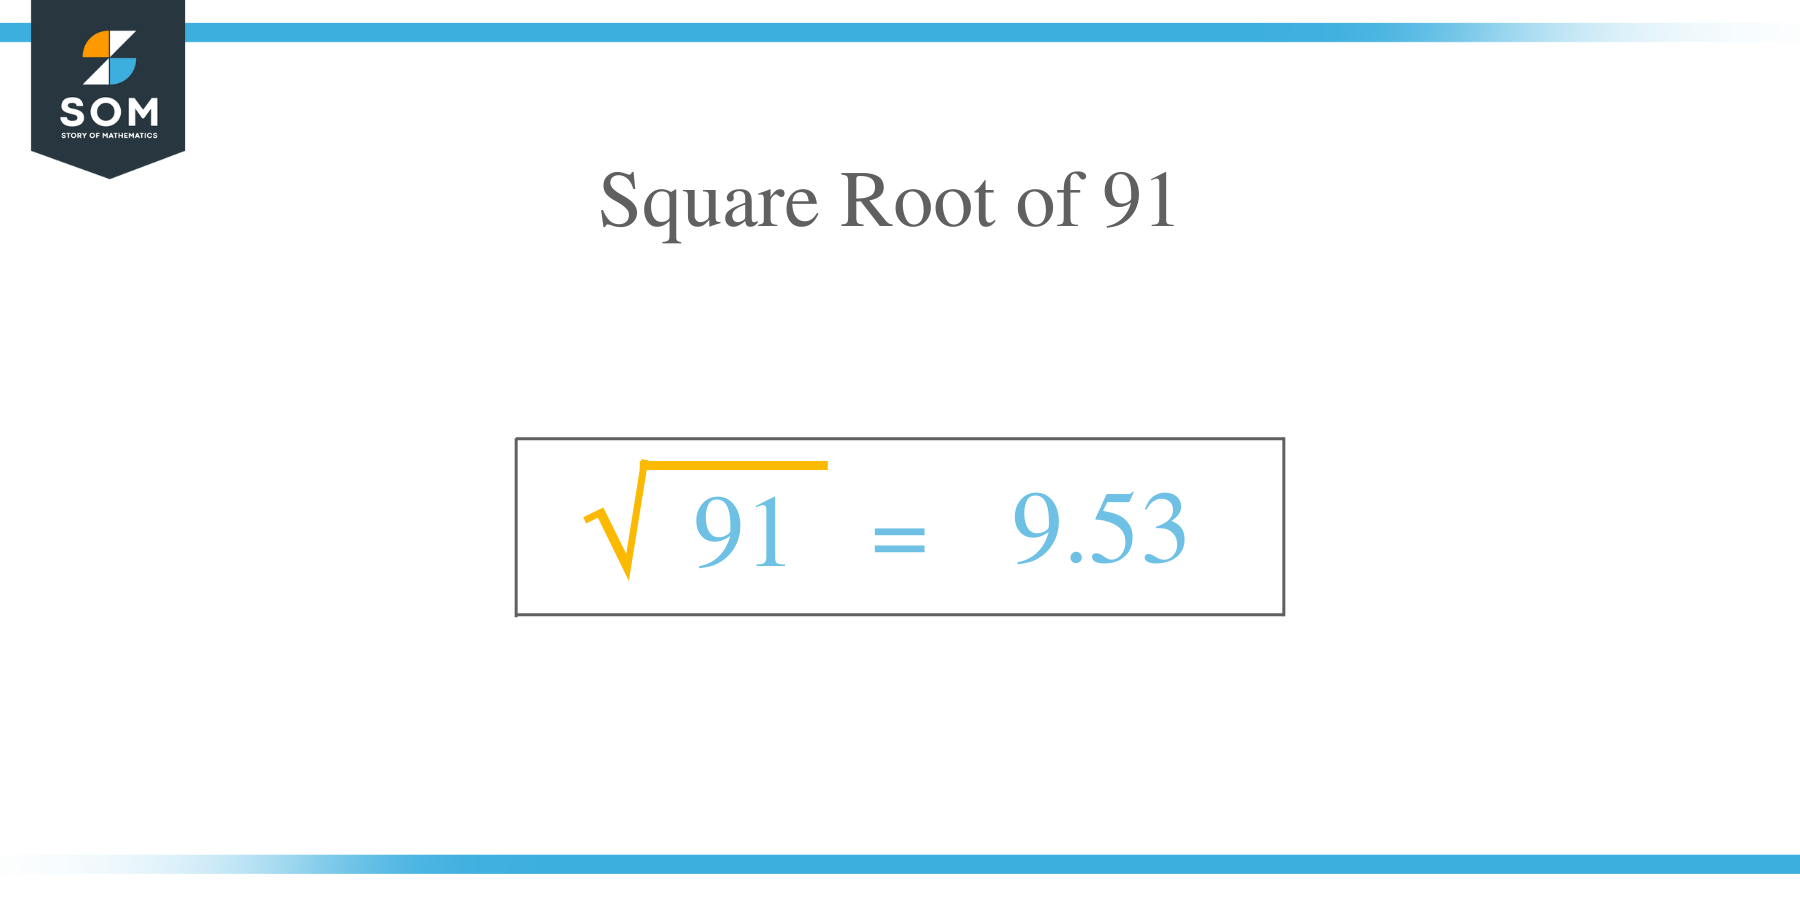 Square Root of 91